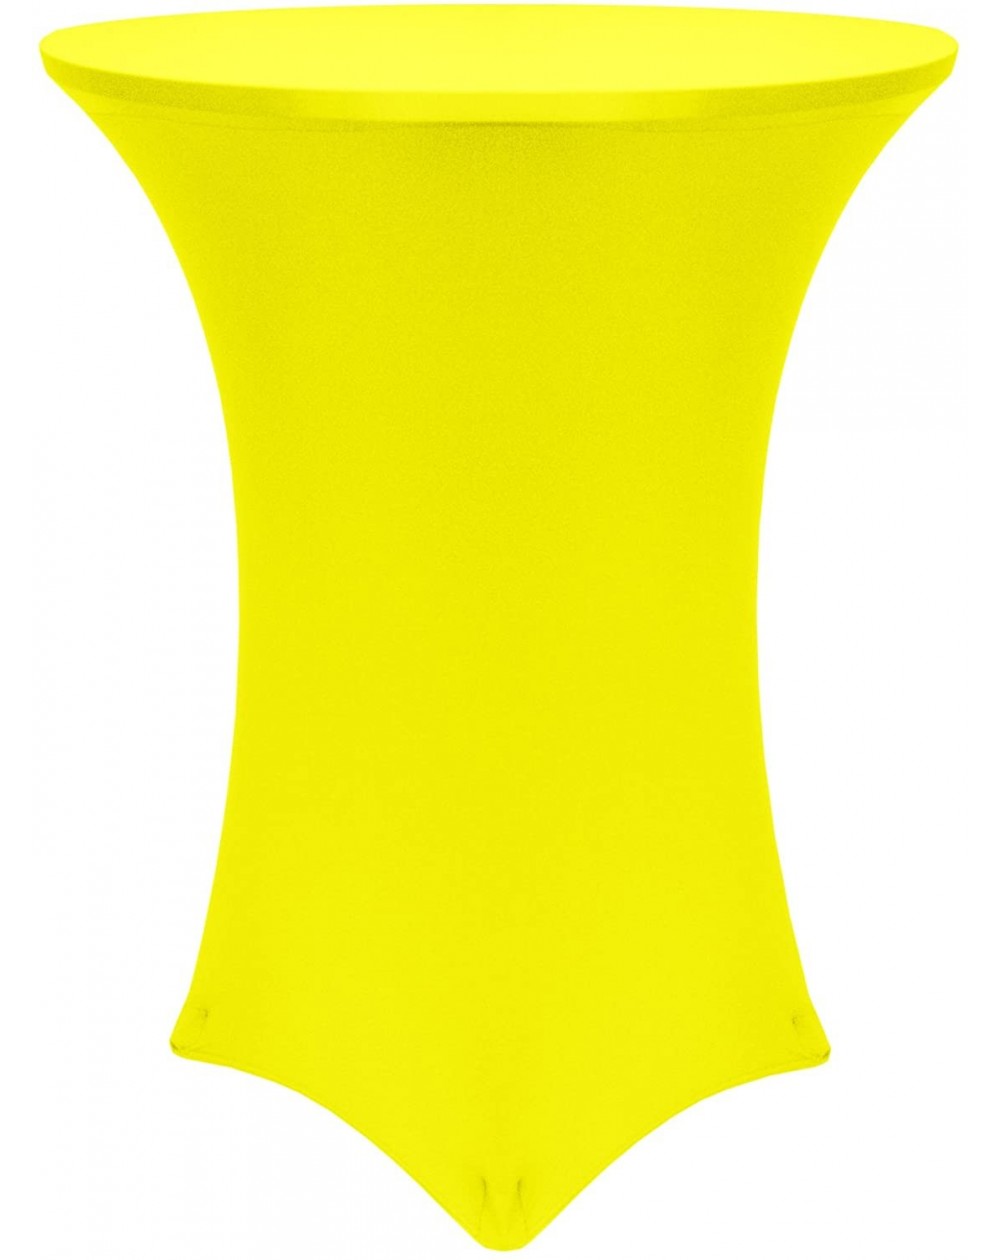 Tablecovers 30-36-Inch Round Cocktail Spandex Fitted Stretch Elastic Tablecloth Neon Yellow - Neon Yellow - CP186KNAZ8M $27.89